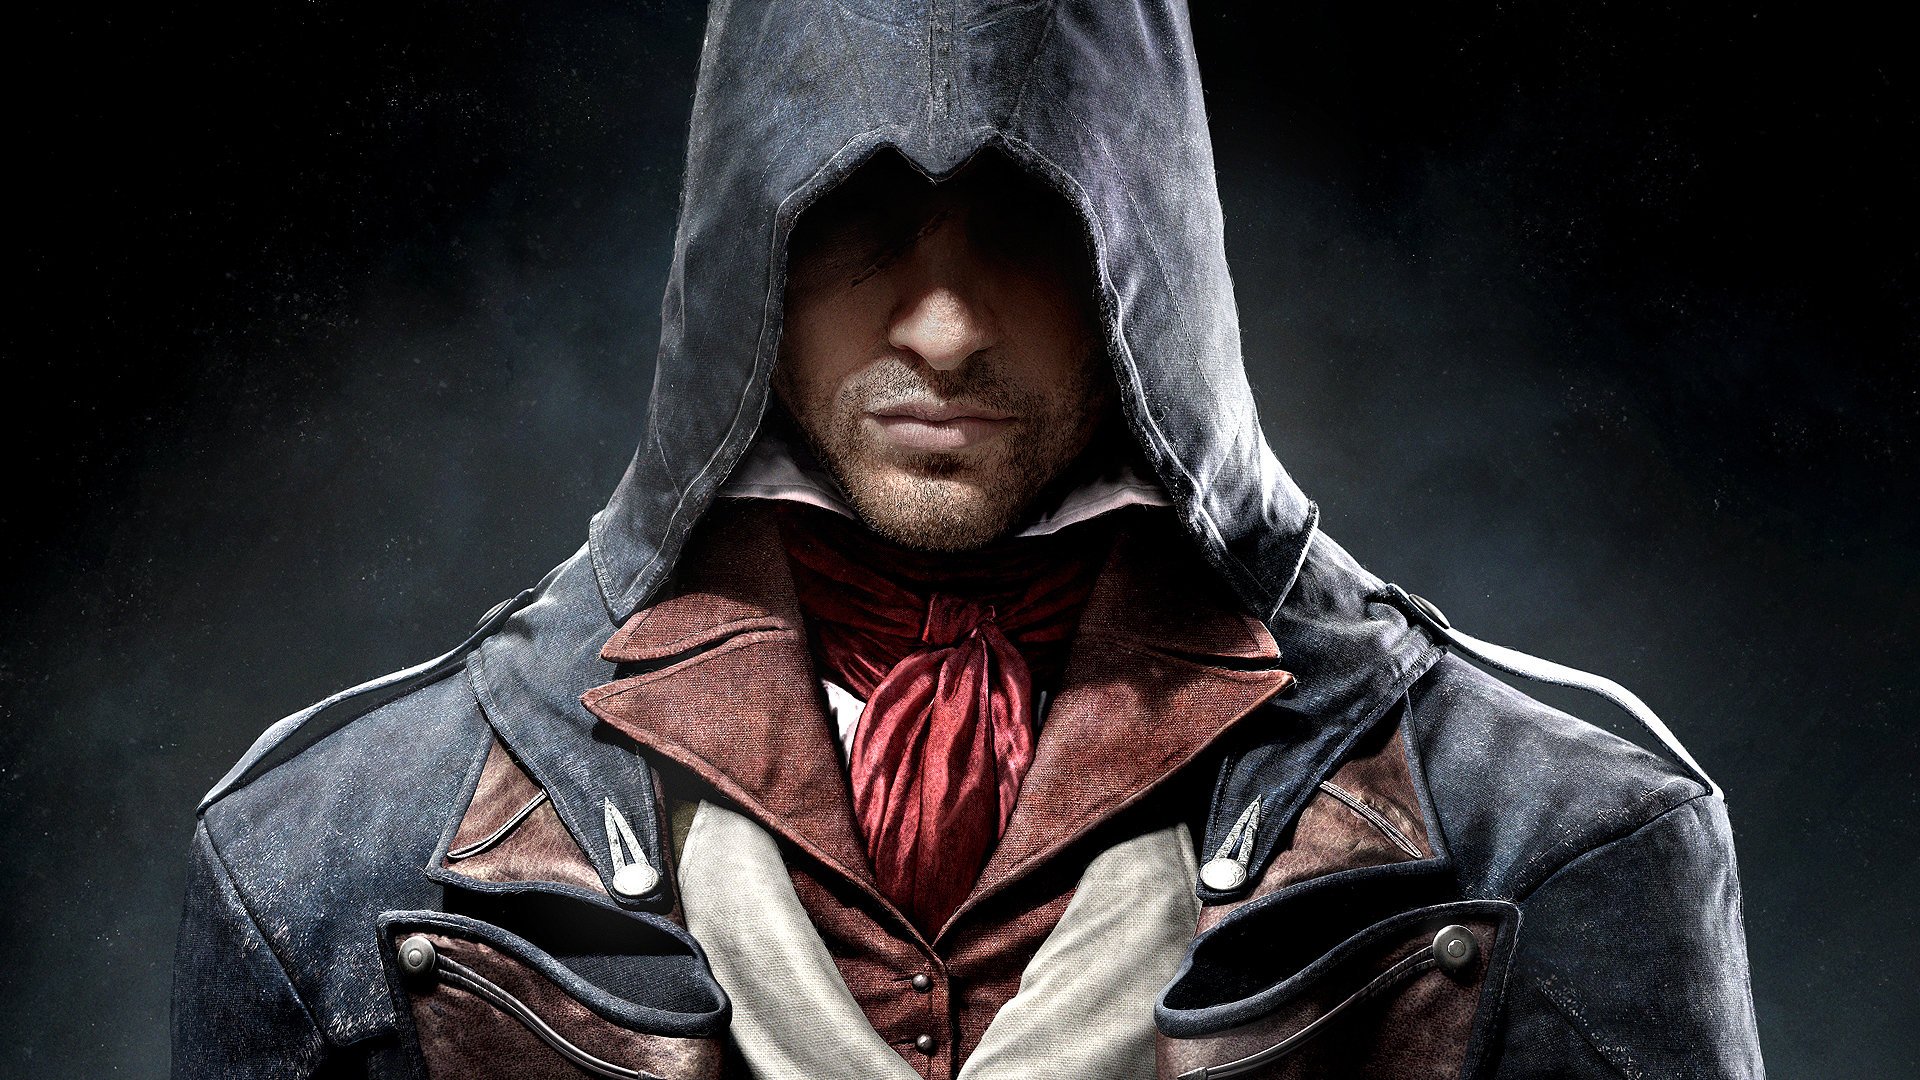 coin-op-amusements-news-assassin-s-creed-attractions-for-saudi-arabia-intergame